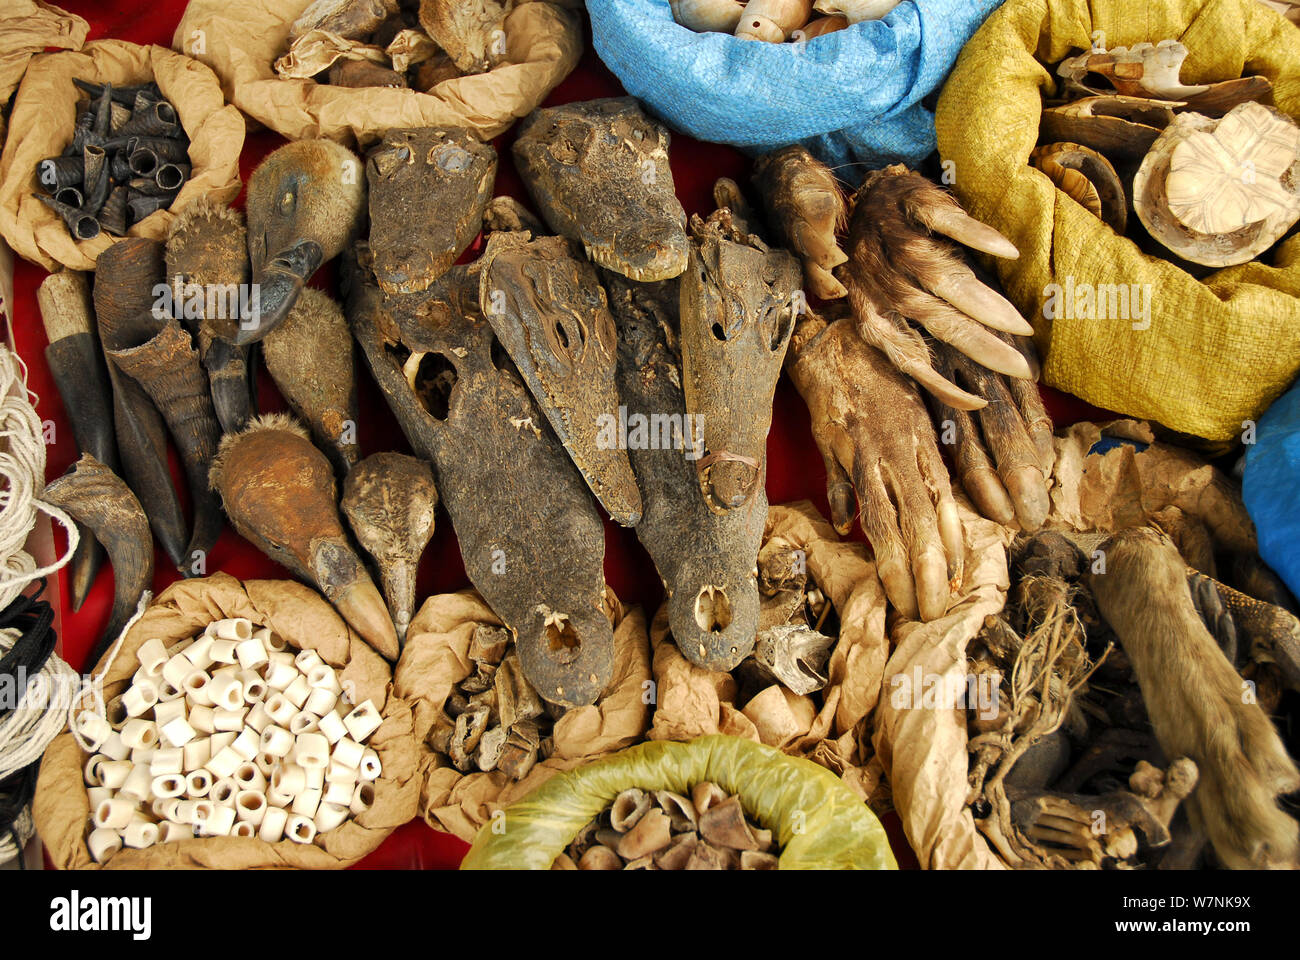 Animal amulets for sale in Sandaga market, one of the most important in Dakar. Crocodile heads, aardvark claws(Orycteropus afer), turtles, vulture heads and shells. Dakar, Senegal. Stock Photo